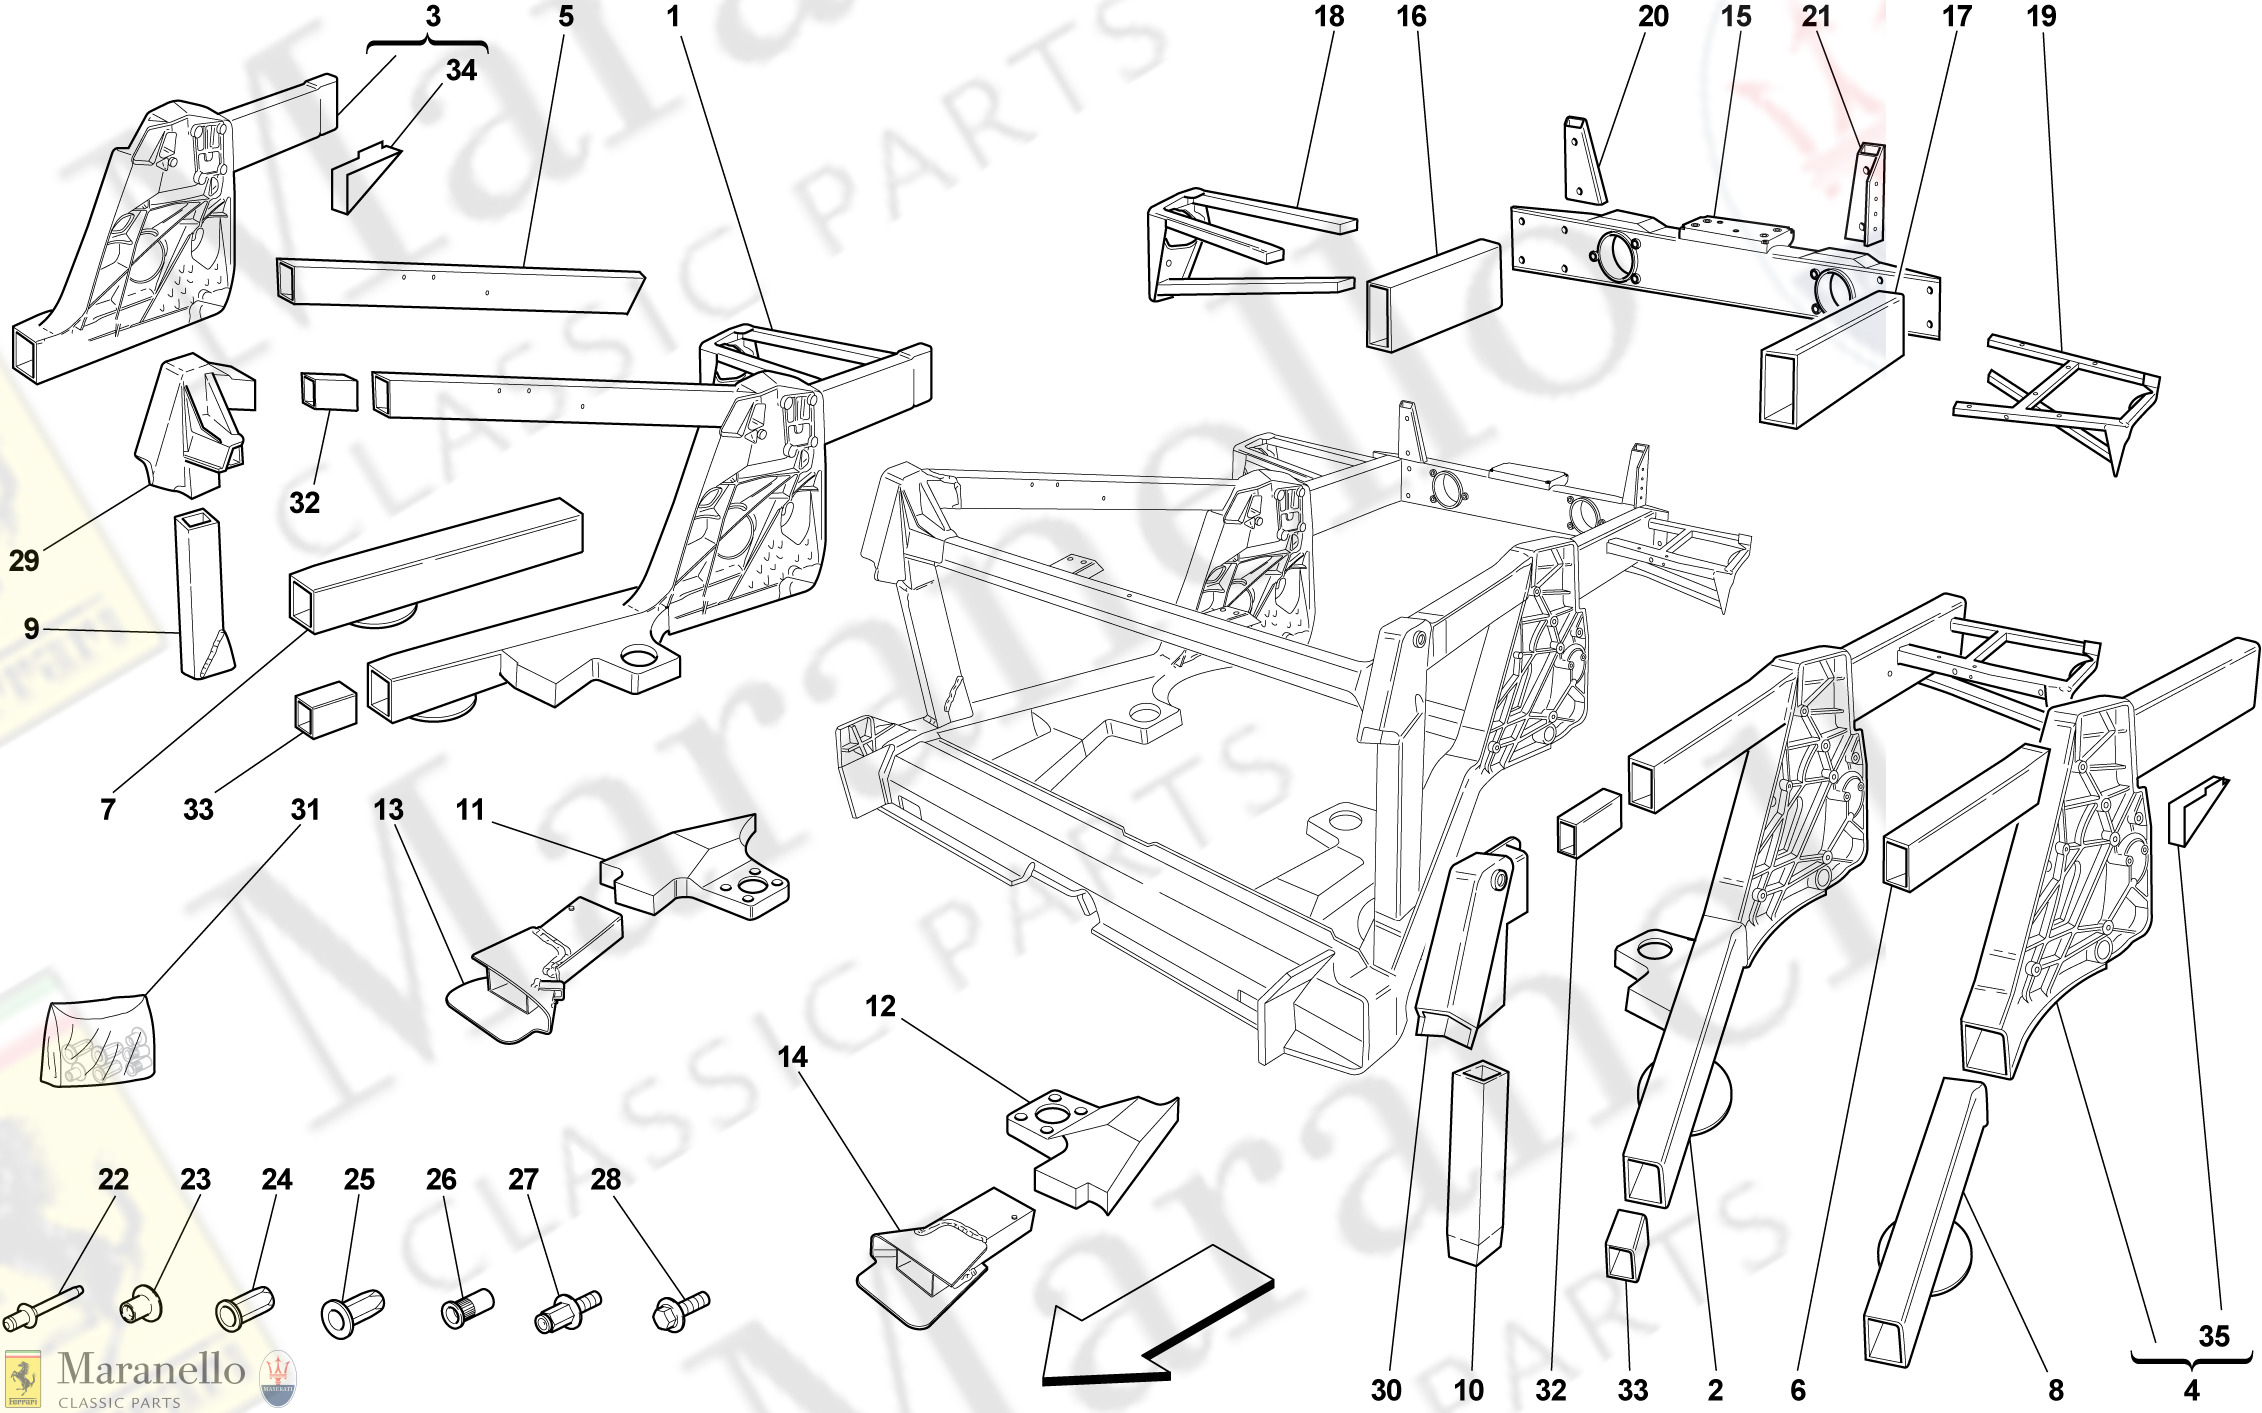 106 - Chassis - Rear Element Subassemblies